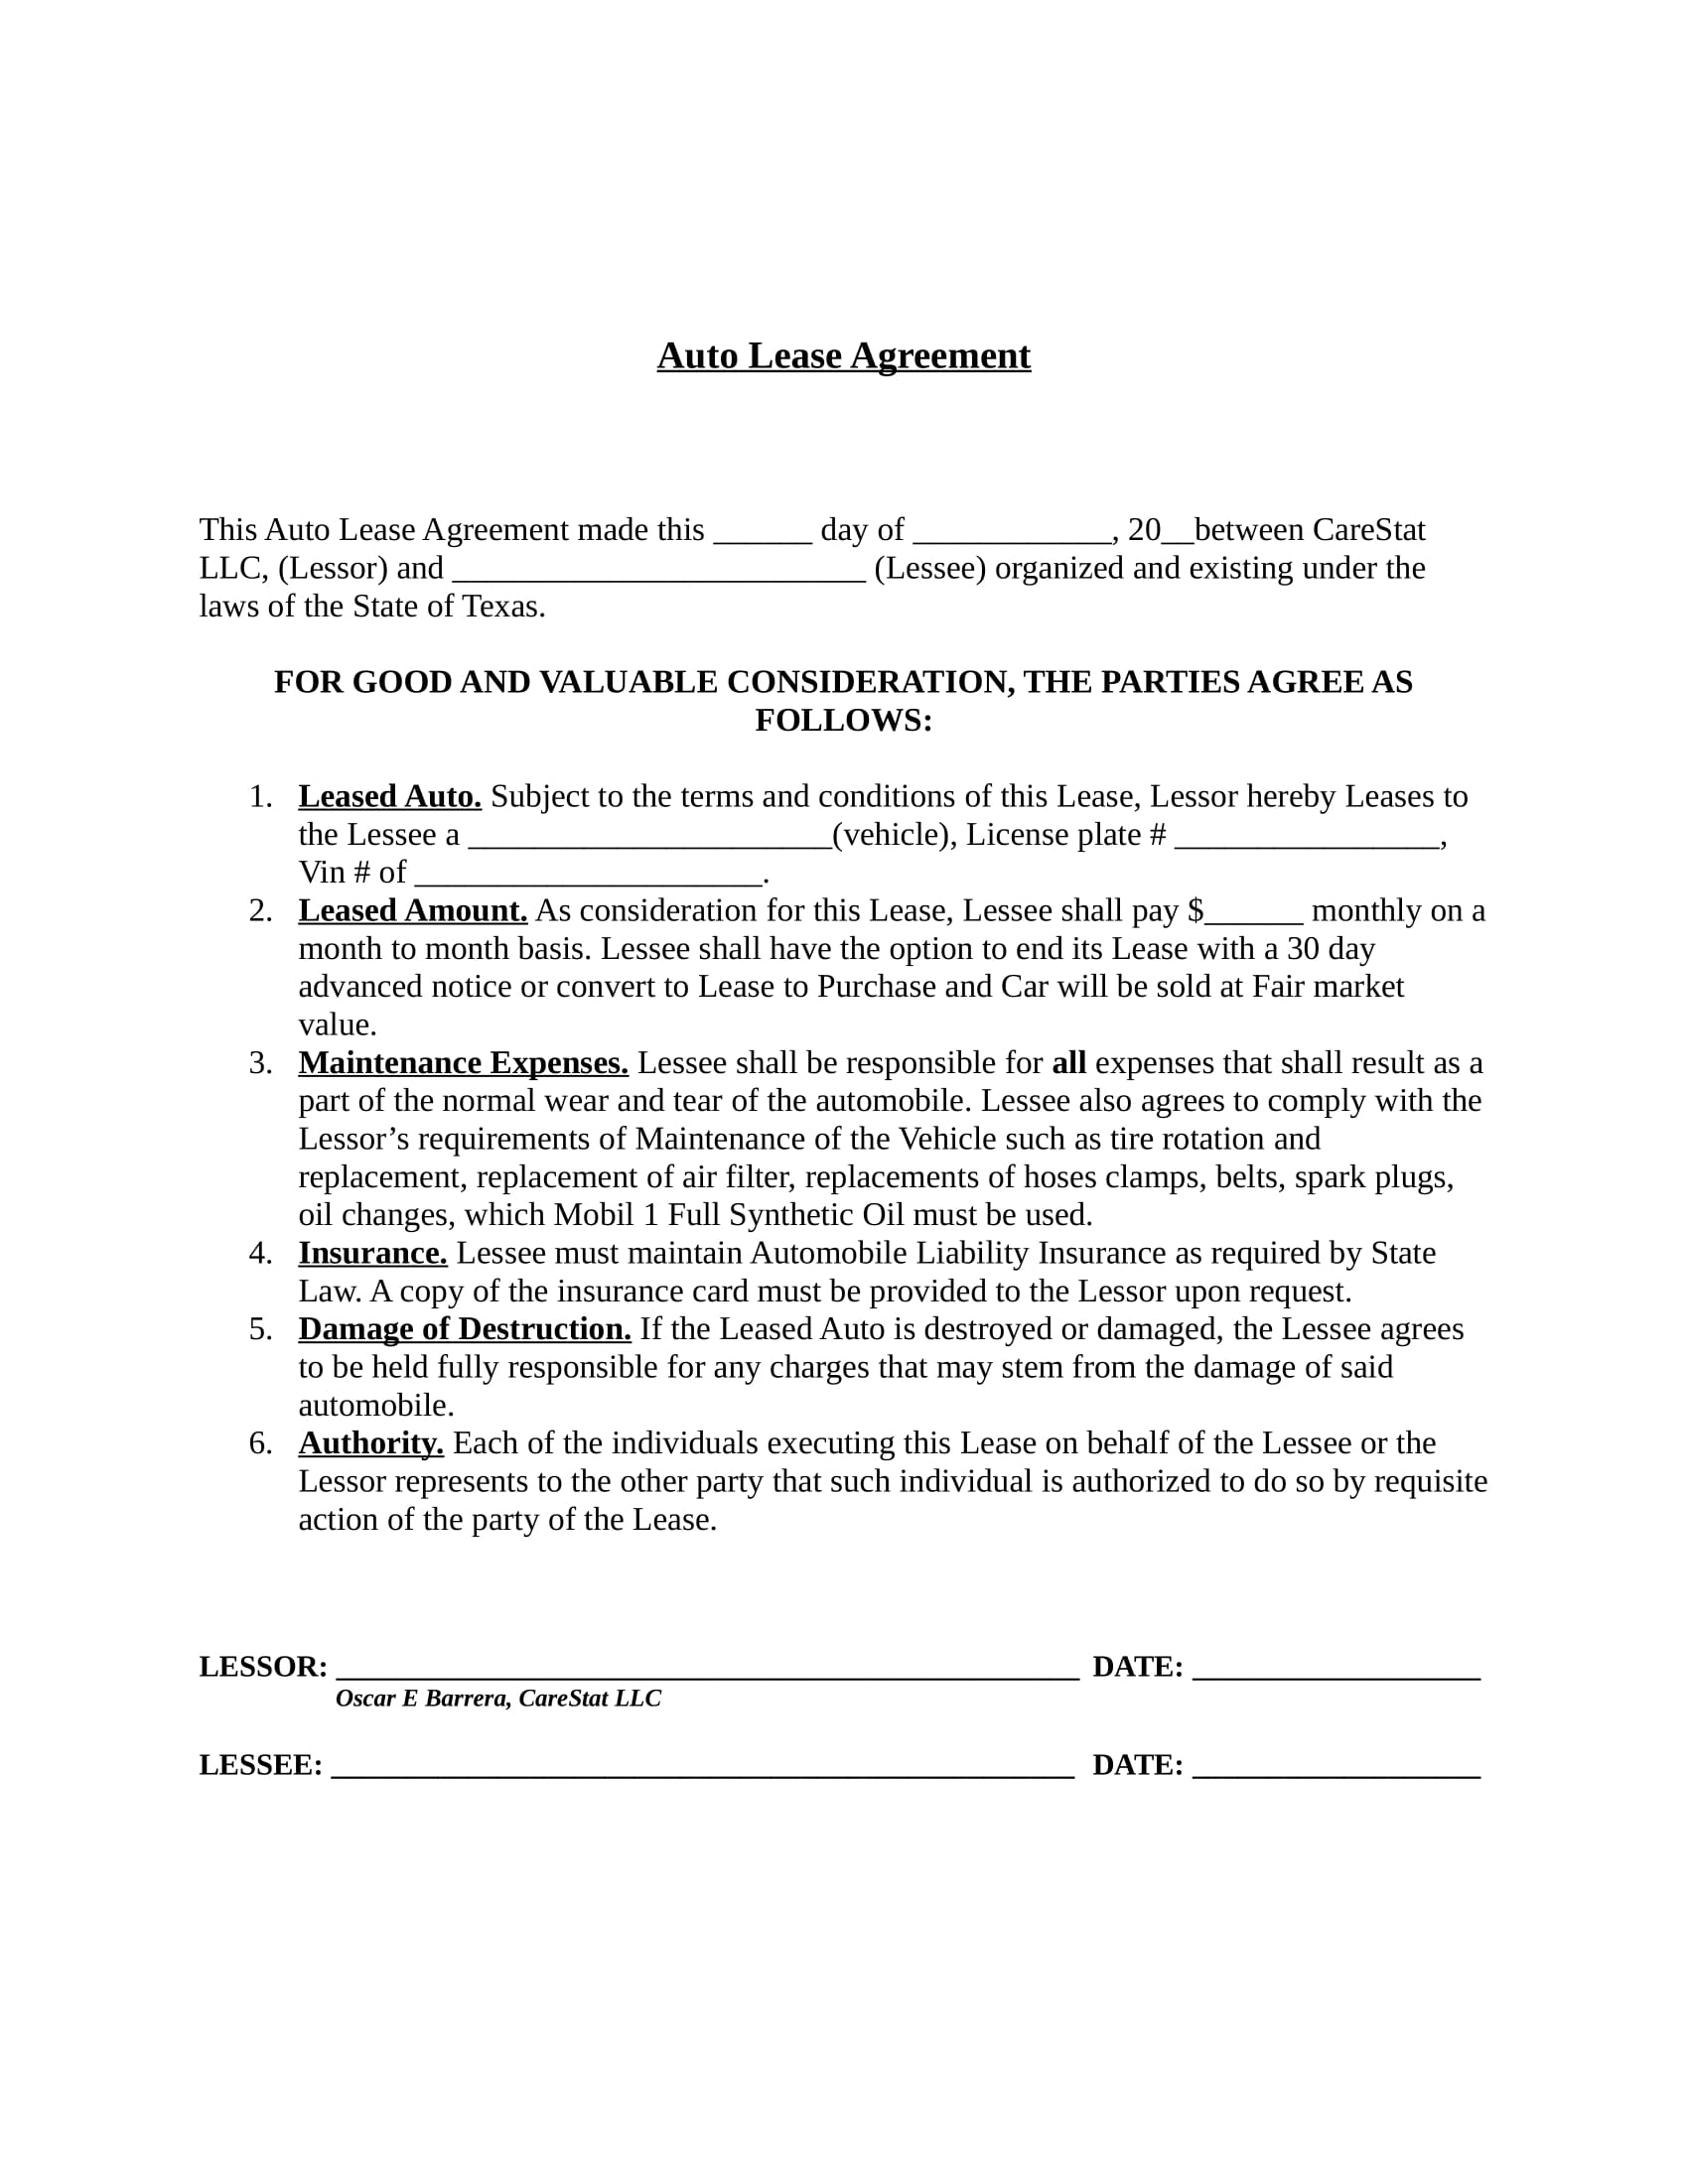 auto lease agreement contract form in doc 1